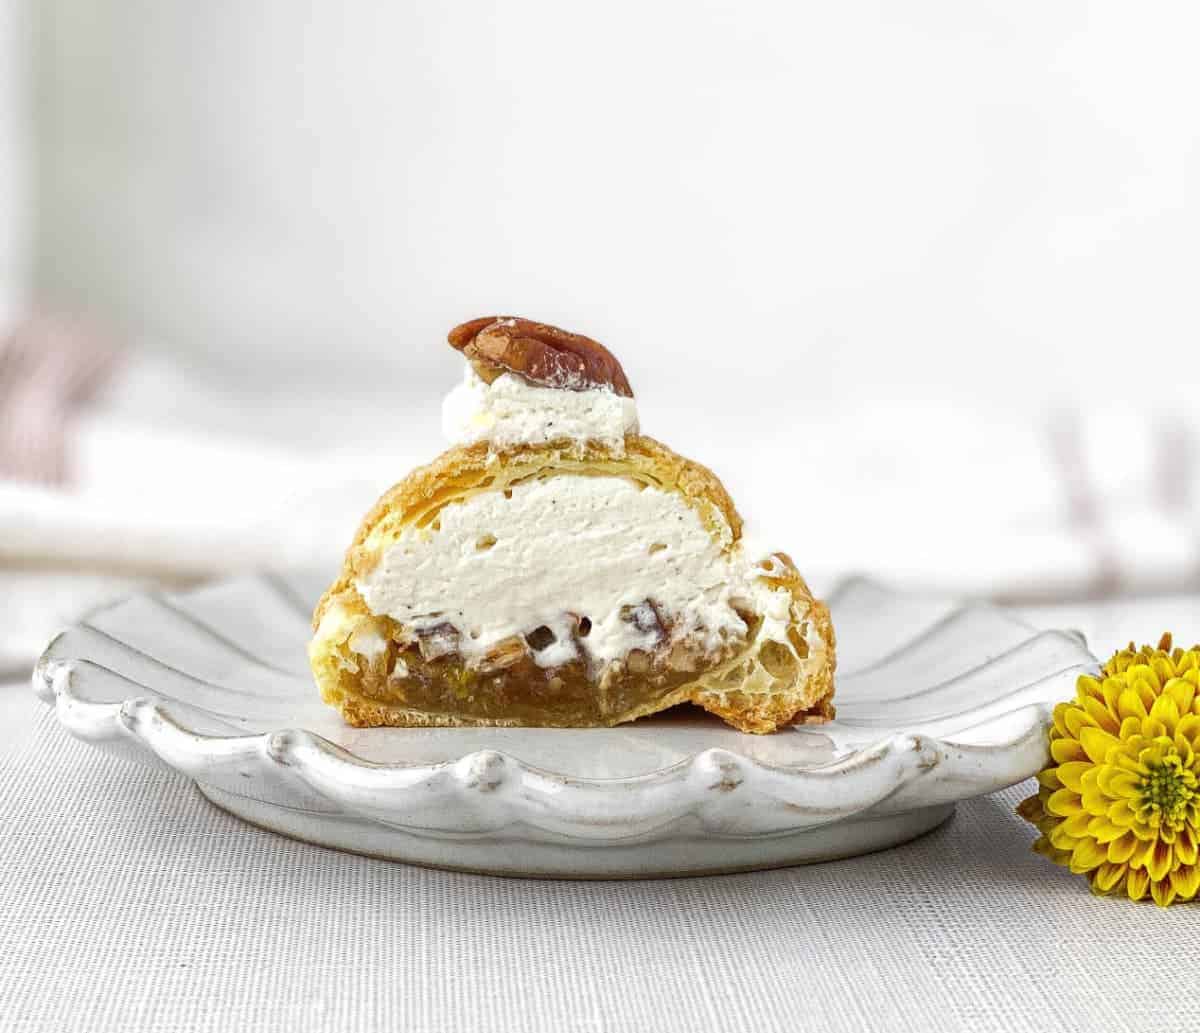 Half a sliced Pecan Pie Cream Puff on a plate with yellow mum flowers nearby